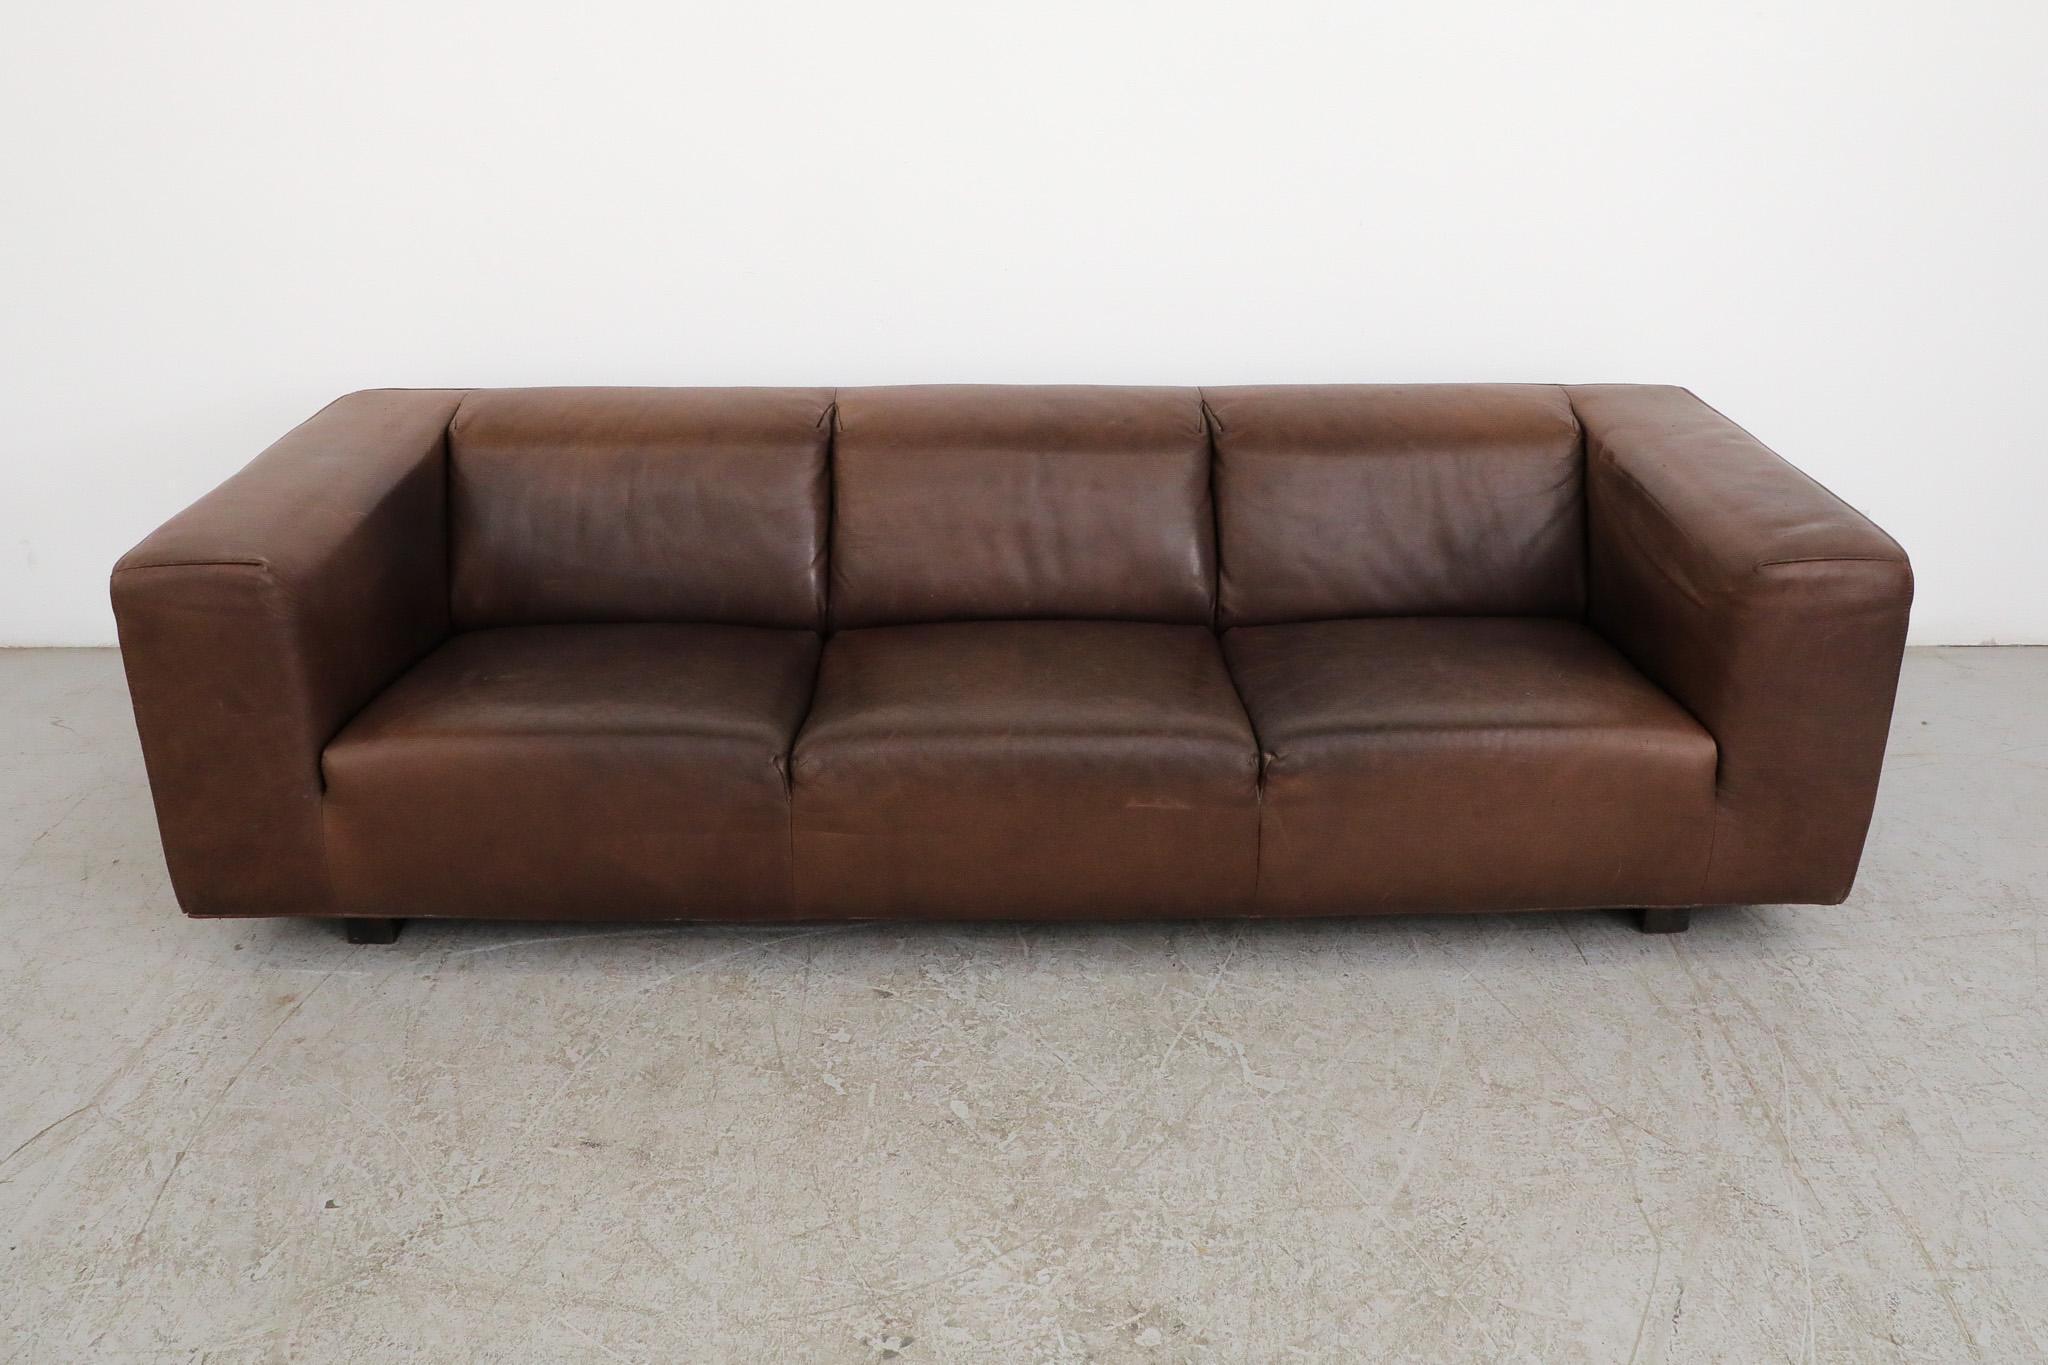 Dutch Mid-Century Brown Leather 'Bommel' Sofa by Gerard van den Berg for LABEL, 1985 For Sale